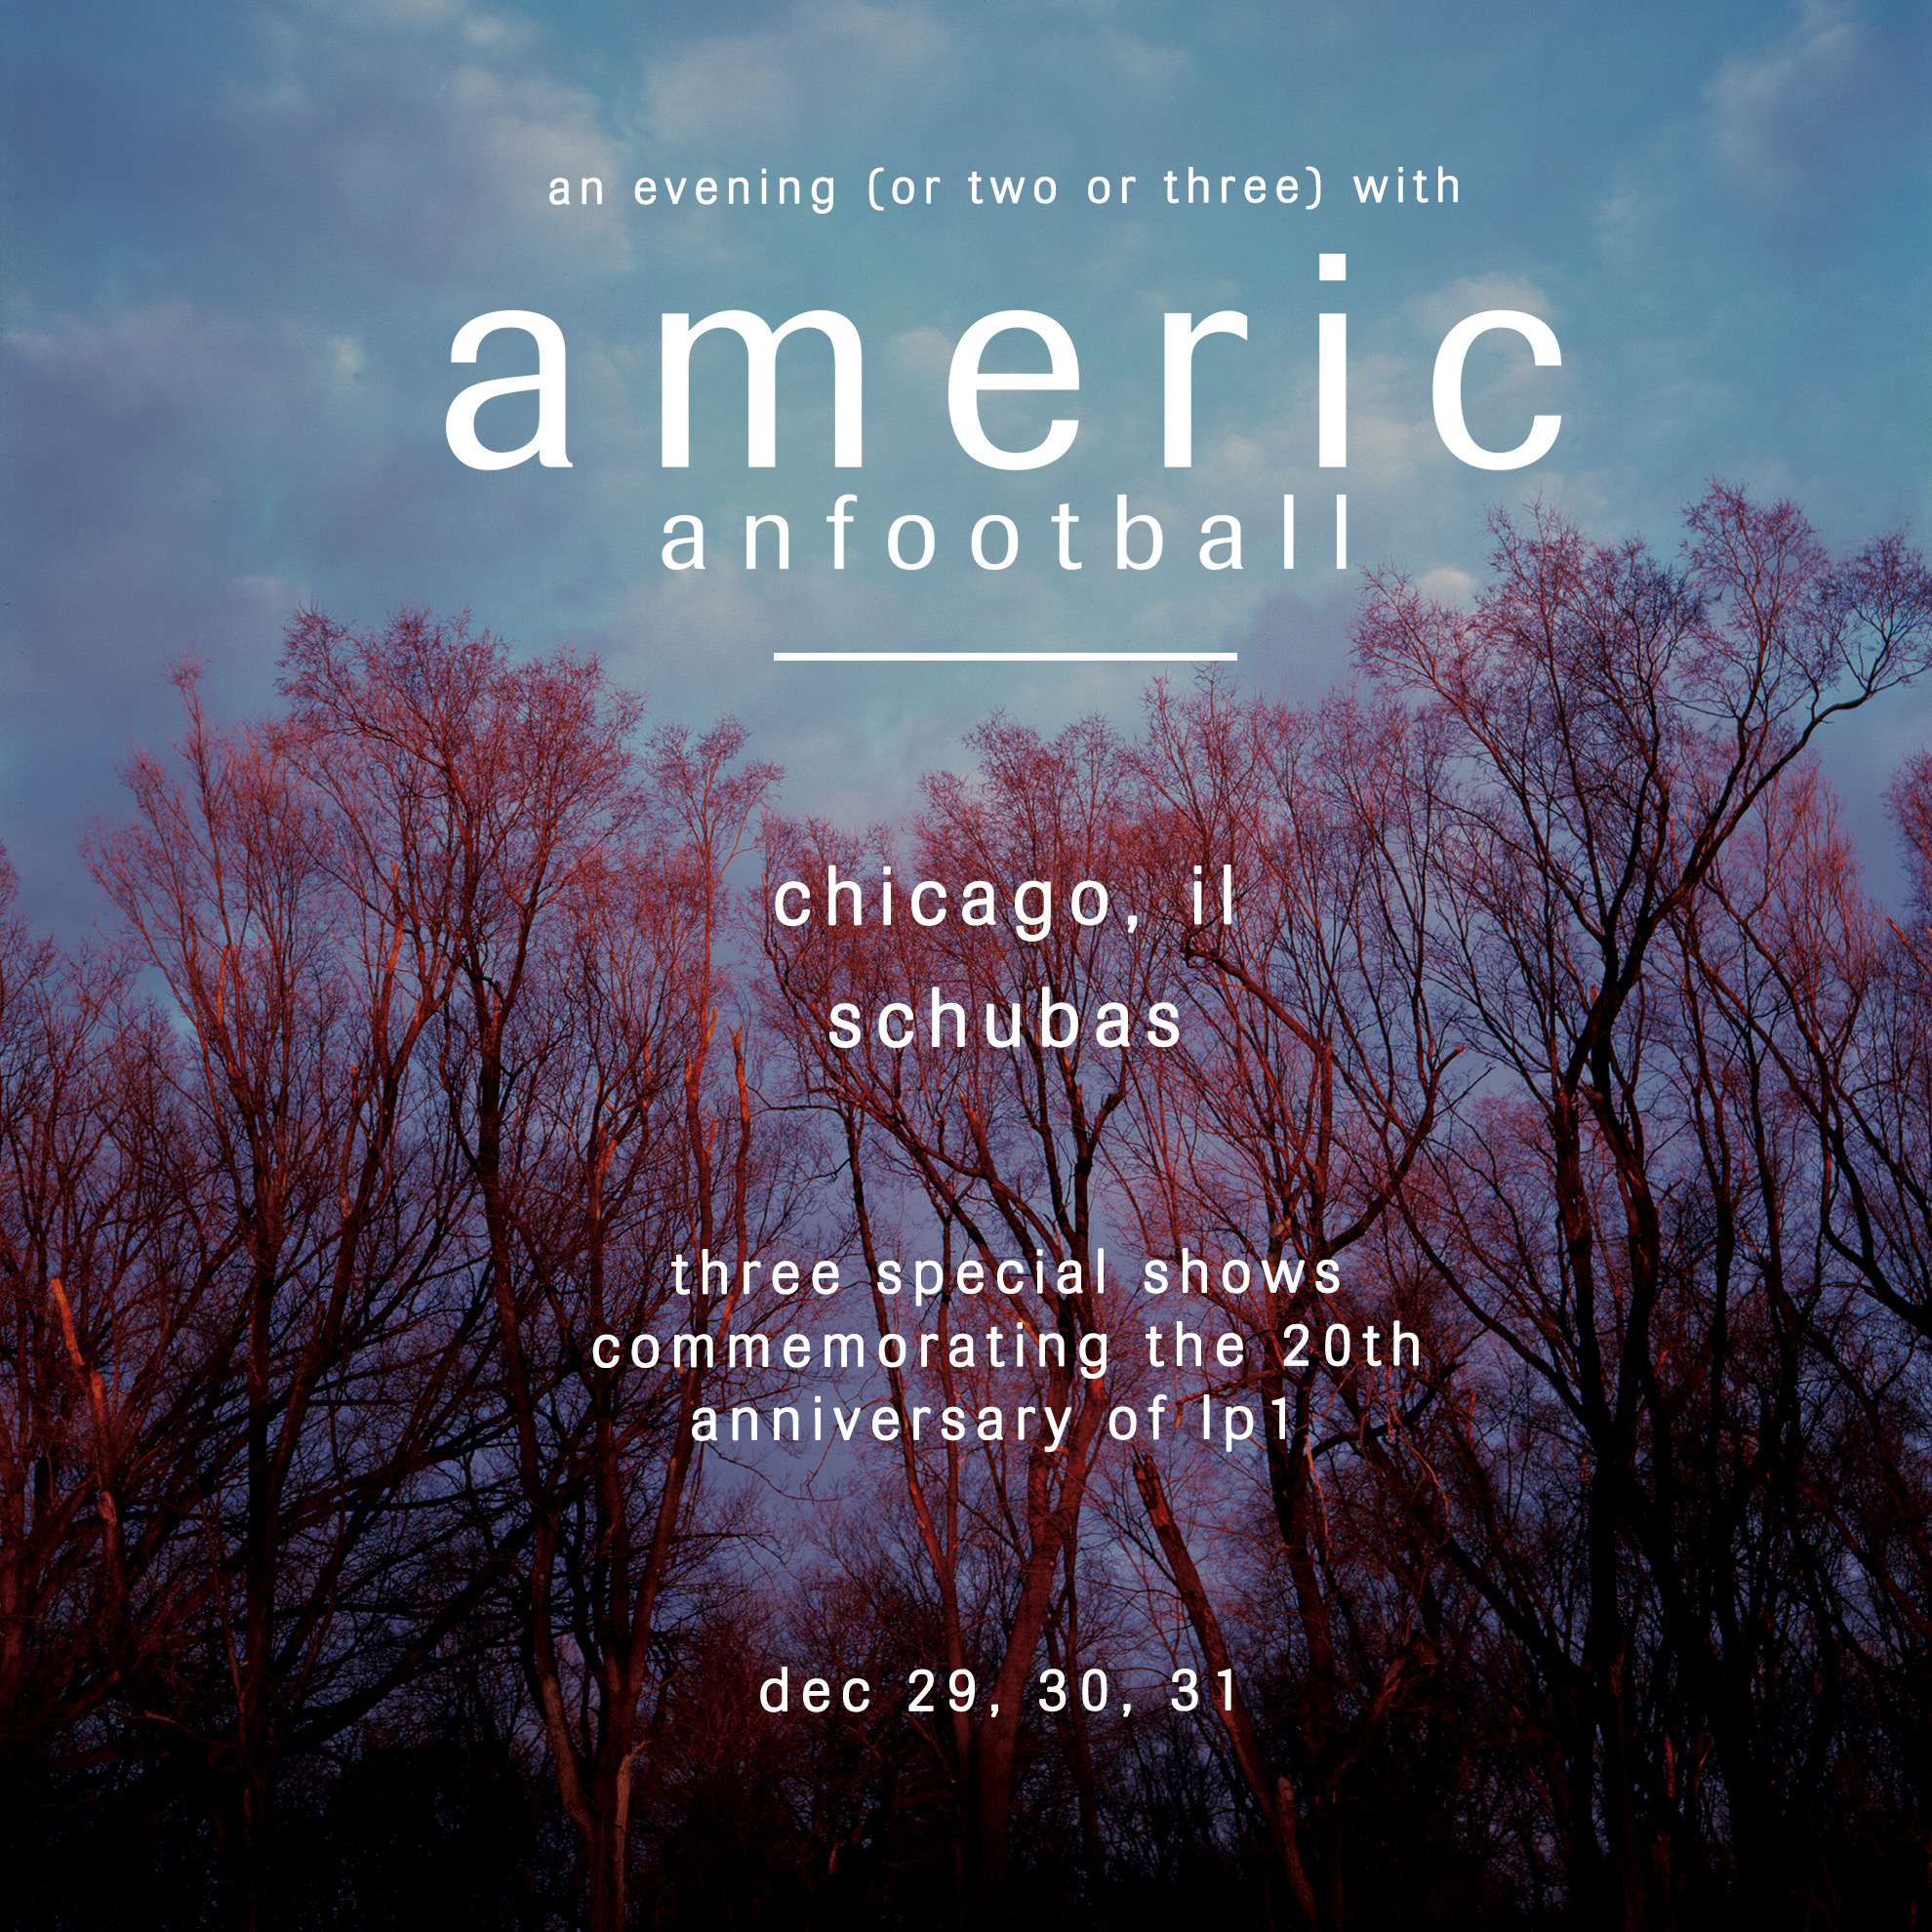 American Football Mark 20th Anniversary of Debut With New <i></noscript>Year One Demos</i> Compilation” title=”AmericanFootballSchubasAdmat-1568471929″ data-original-id=”343219″ data-adjusted-id=”343219″ class=”sm_size_full_width sm_alignment_center ” data-image-use=”multiple_use” /><br />
<strong>American Football Tour Dates:</strong><br />
09/13 – Kansas City, MO @ Granada Theatre<br />
09/14 – St. Louis, MO @ Delmar Hall<br />
09/15 – Chicago, IL @ Riot Fest<br />
11/02 – Camden, London, UK @ Mirrors Festival<br />
11/03 – Leeds, UK @ Brudenell<br />
11/04 – Manchester, UK @ Gorilla<br />
12/29-31 – Chicago, IL @ Schubas Tavern</p>
</div>
</div>
</div>
</div>
</div>
</section>
<section data-particle_enable=